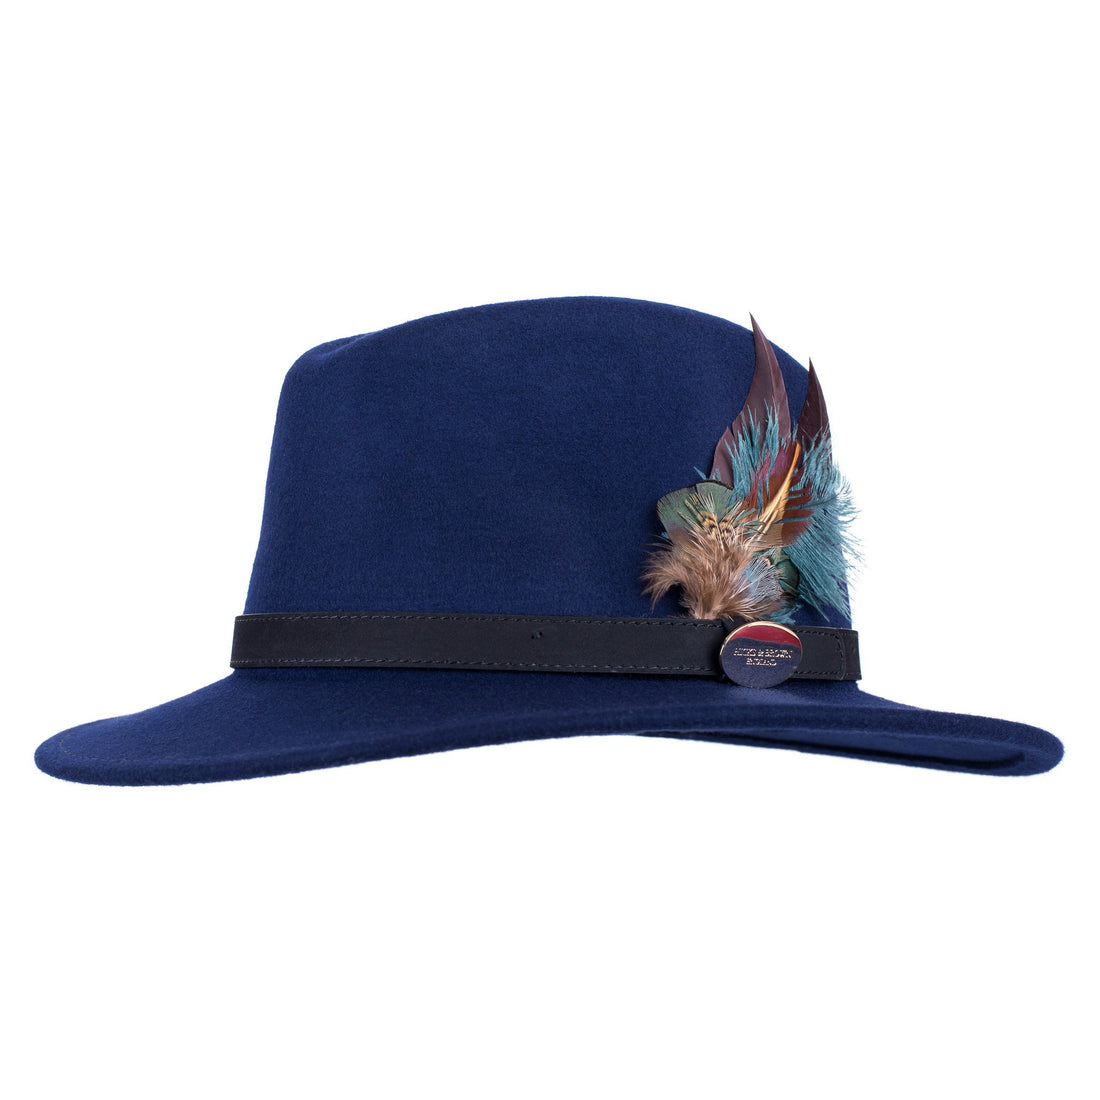 Suffolk Fedora - Navy Classic Feather